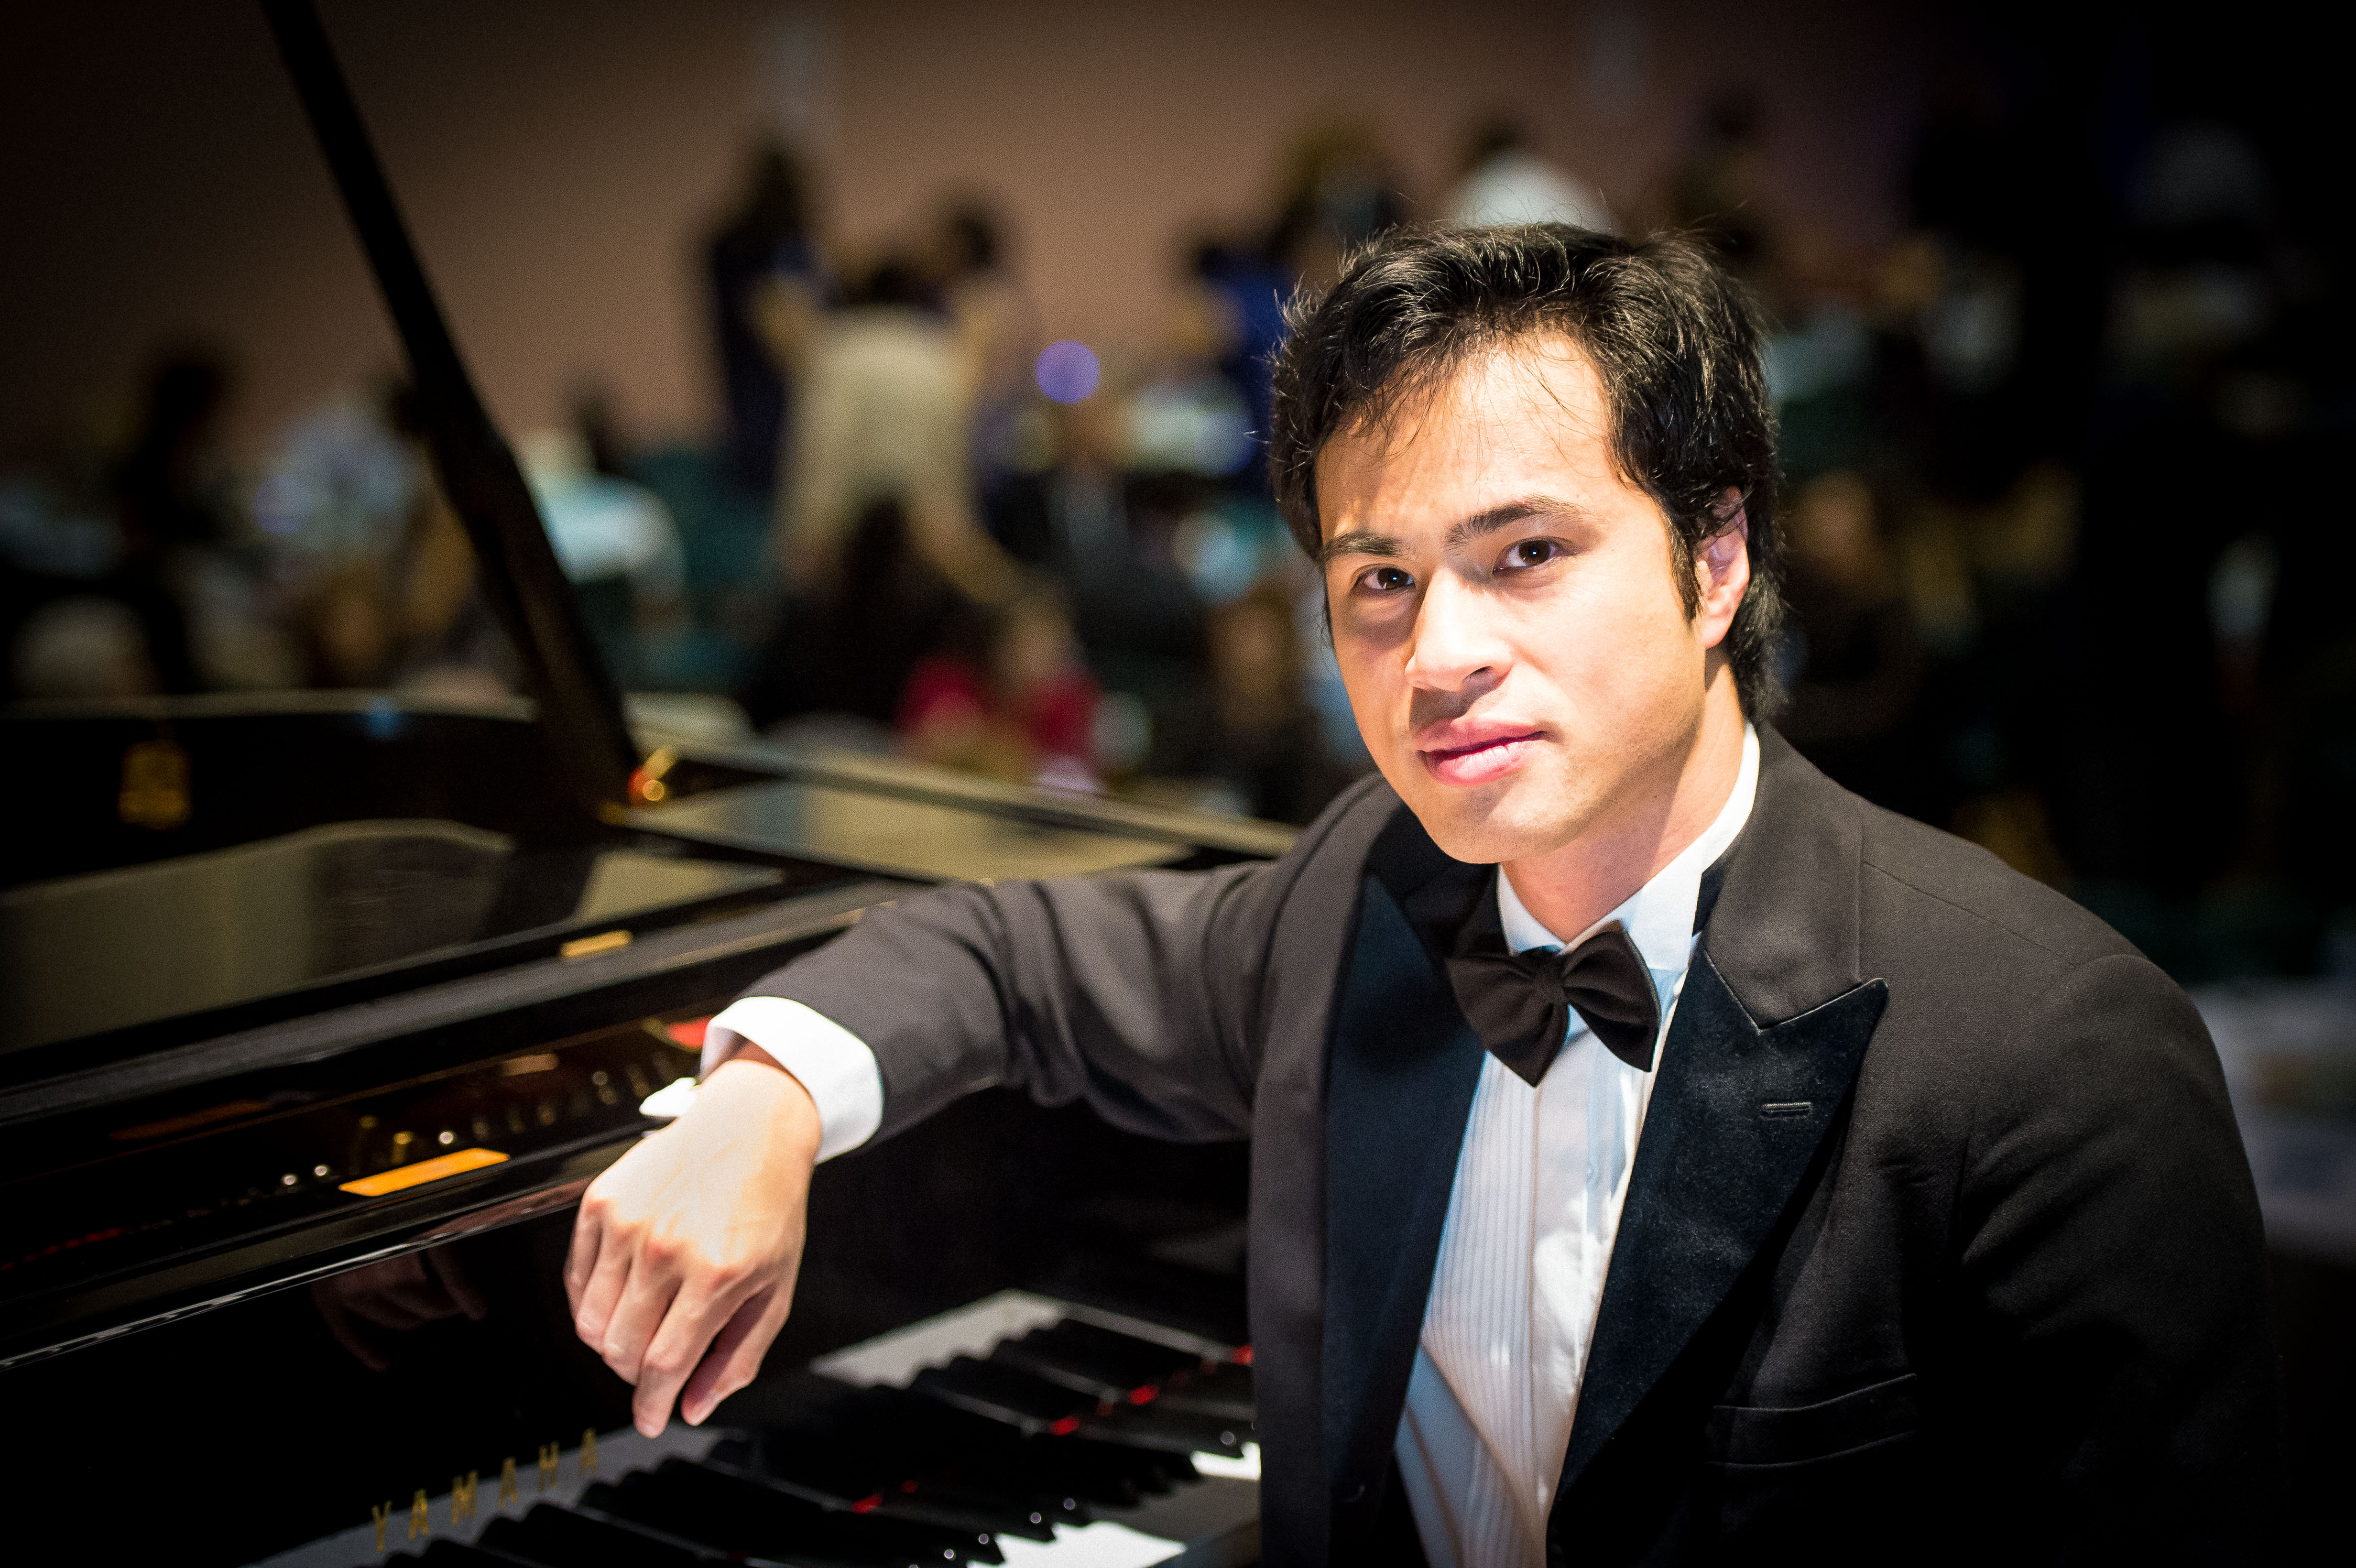 Hoang Pham On “Being The Best Pianist I Can Be”